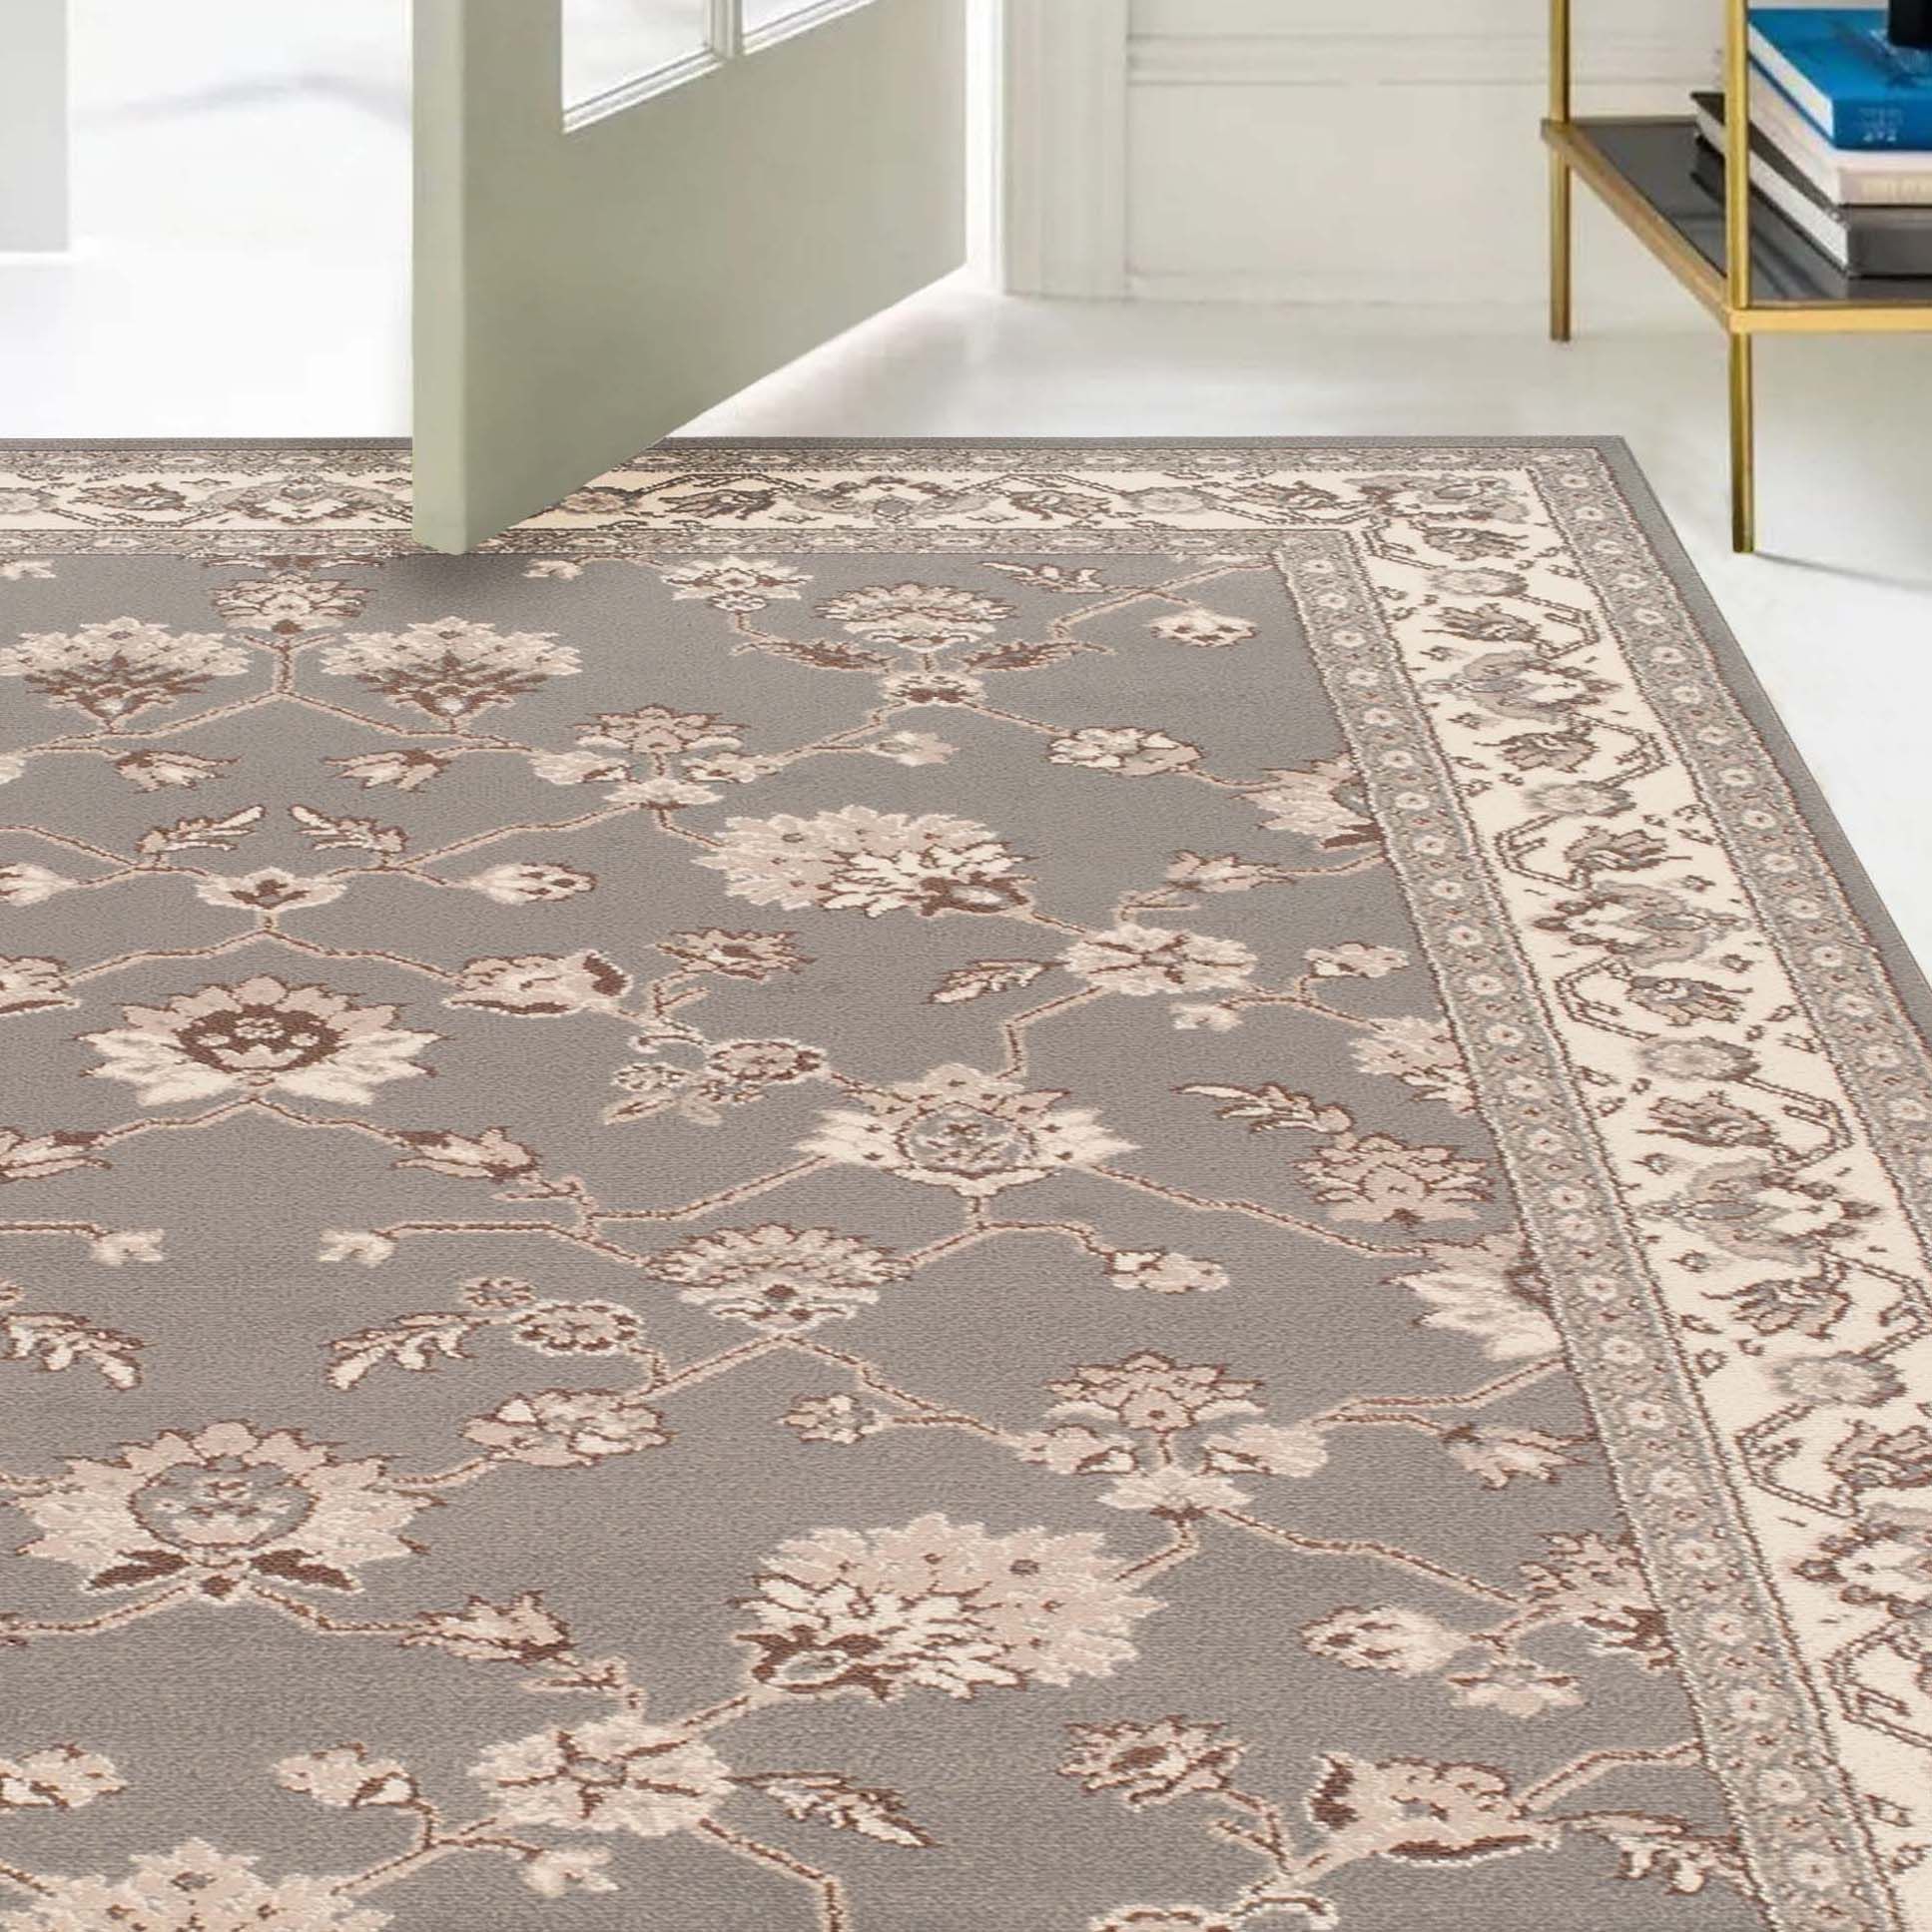 Kingfield Designer Area Rug Collection - image 5 of 5